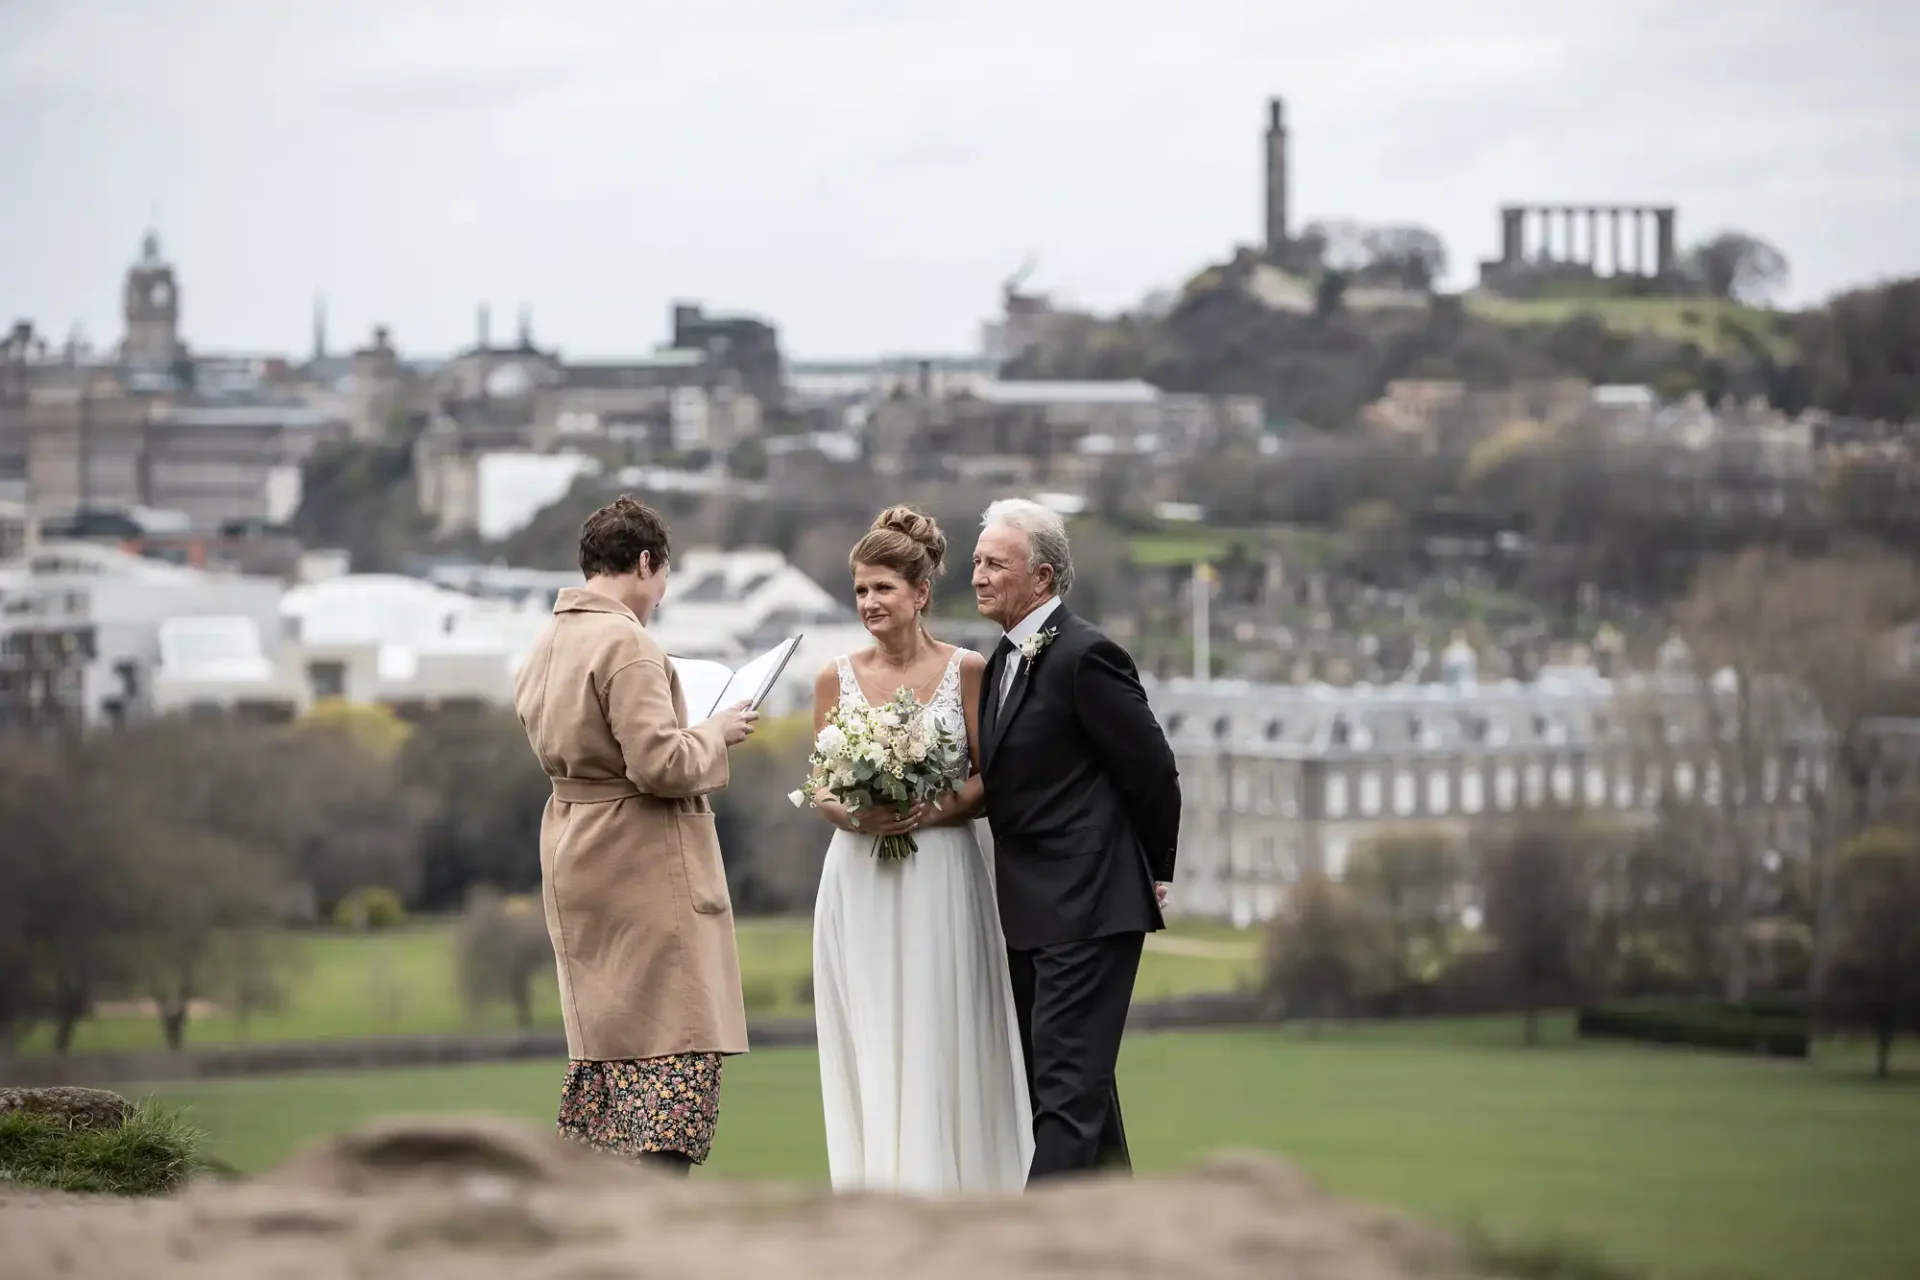 A bride and groom stand together, smiling, as an officiant conducts their wedding ceremony outdoors with a cityscape and greenery in the background.